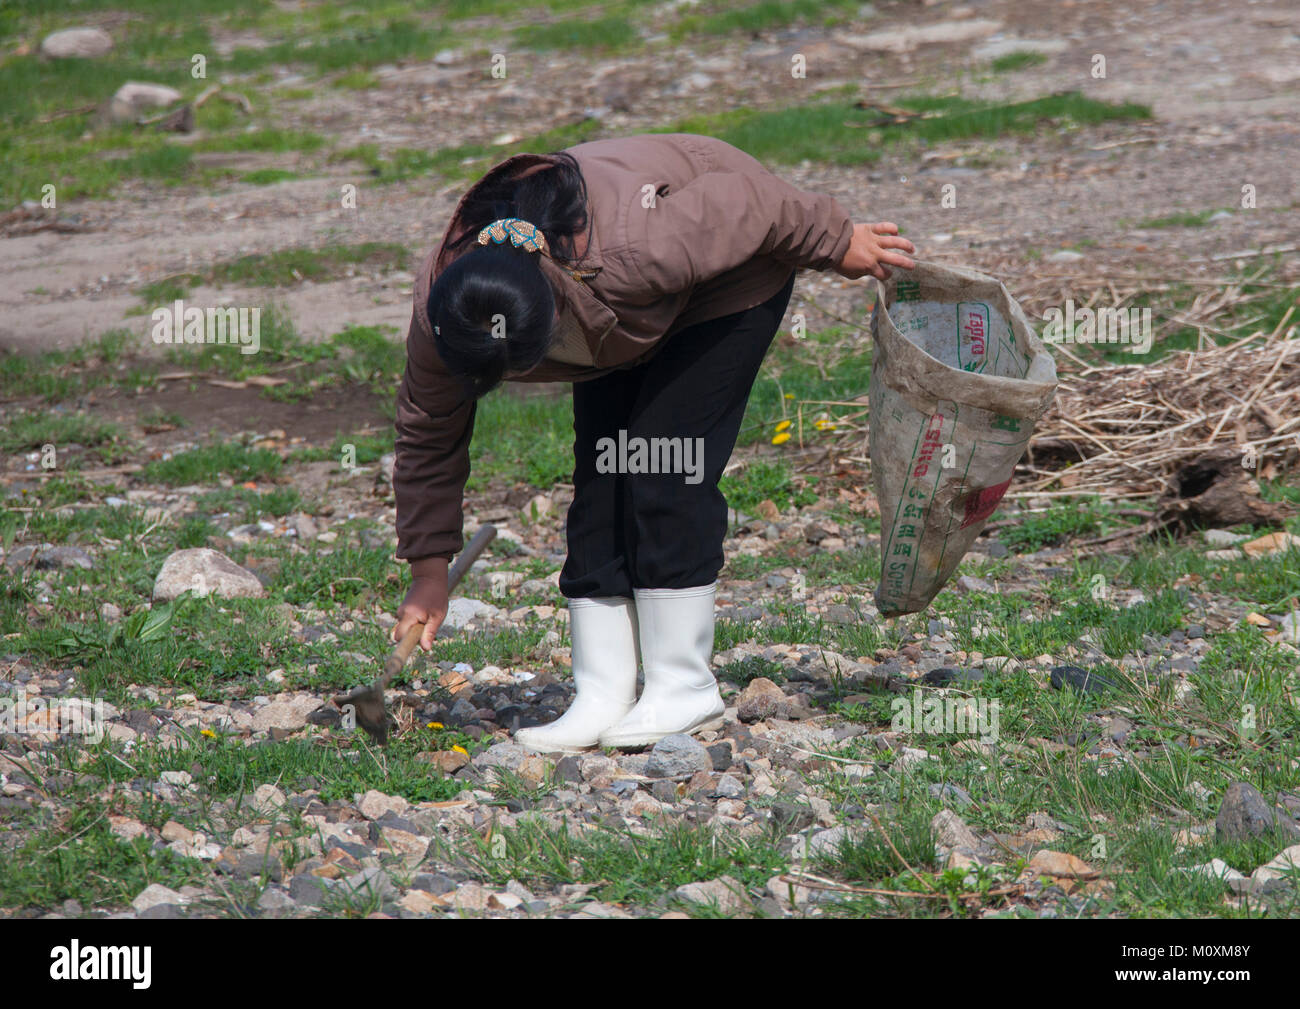 North Korean woman collecting grass to eat in a field, North Hamgyong Province, Jung Pyong Ri, North Korea Stock Photo